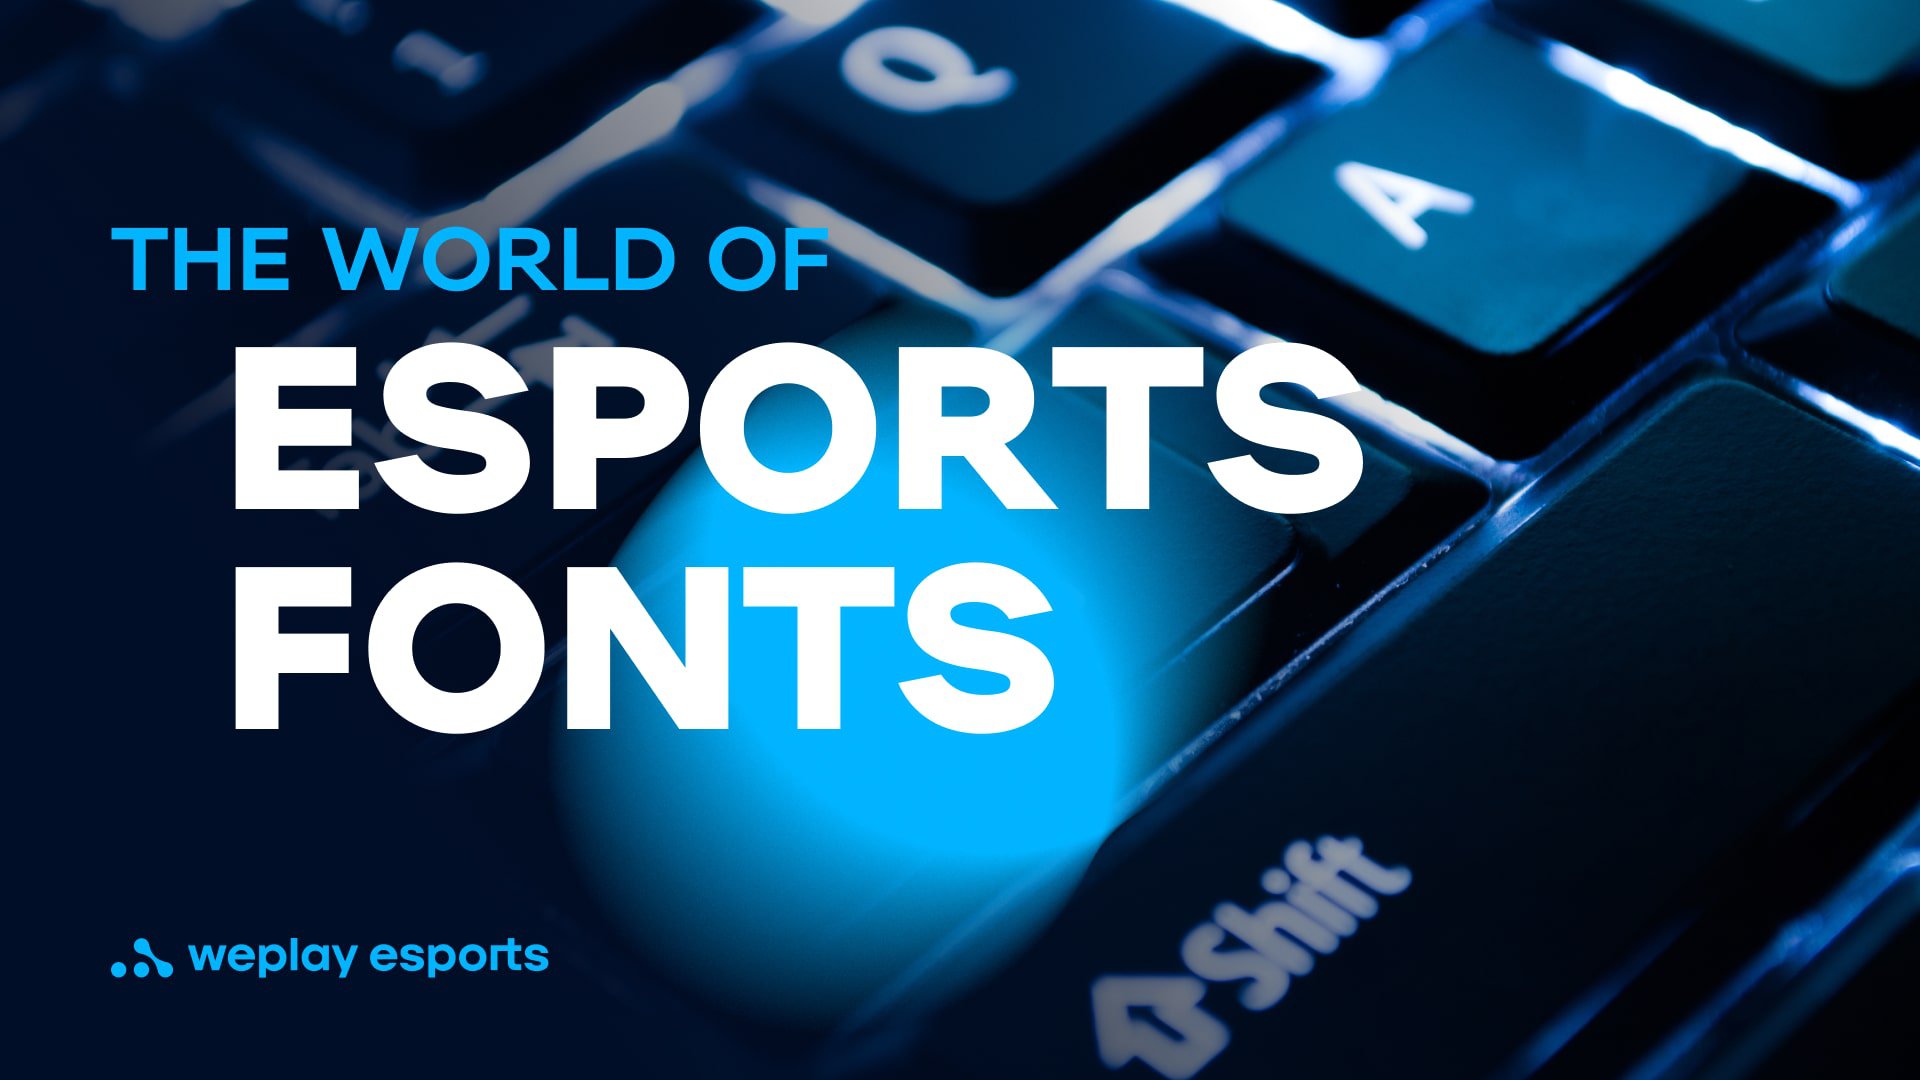 The World of Esports Fonts. Credit: WePlay Holding